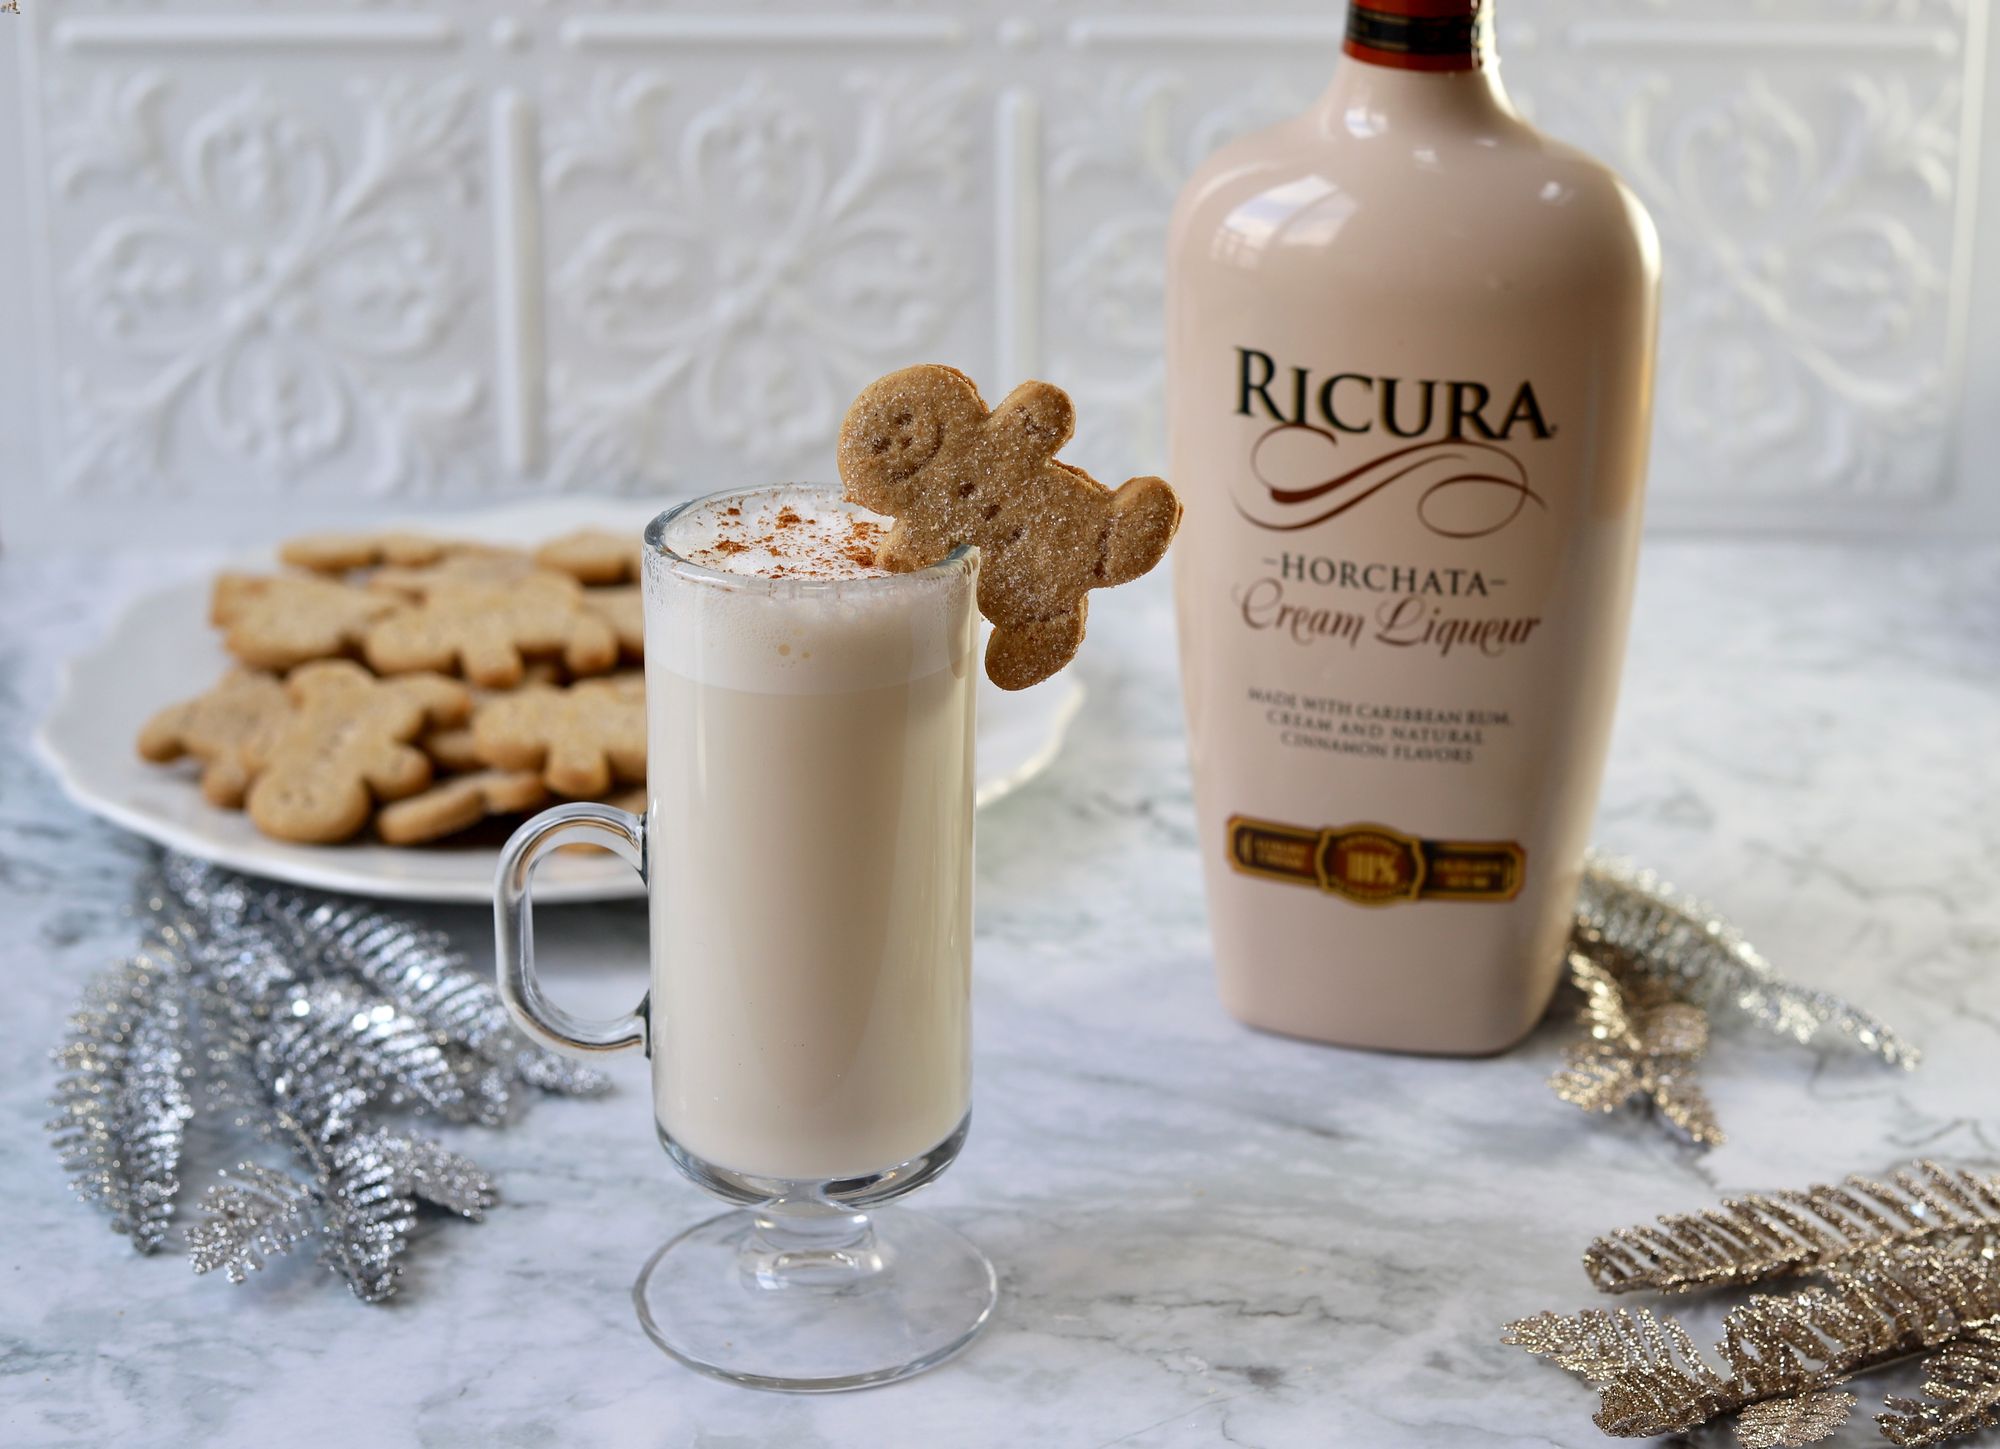 how-to-drink-ricura